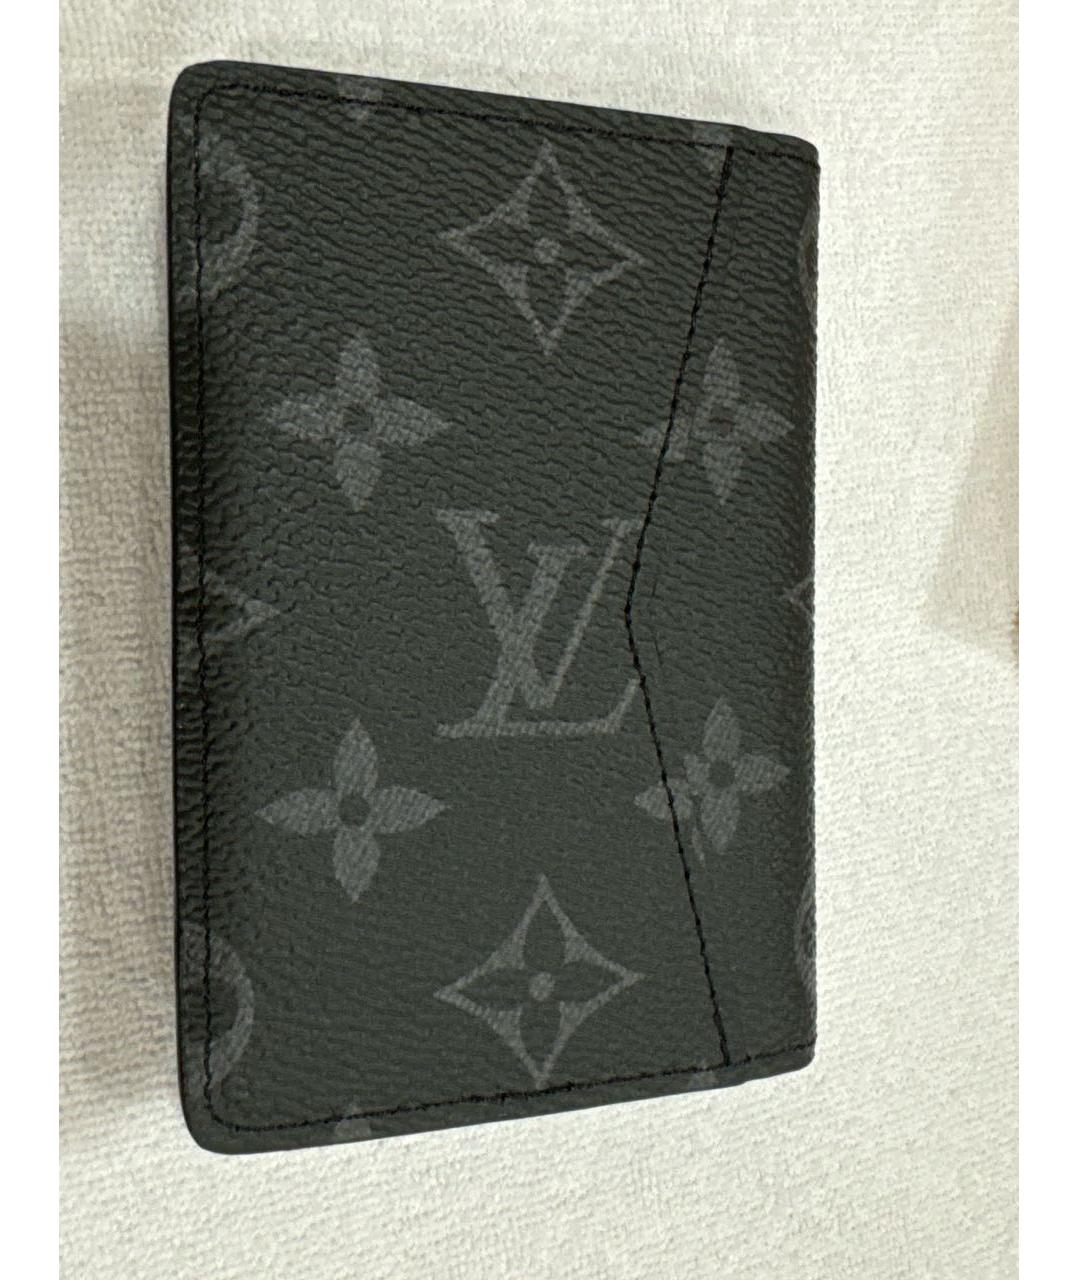 LOUIS VUITTON PRE-OWNED Черный кардхолдер, фото 2